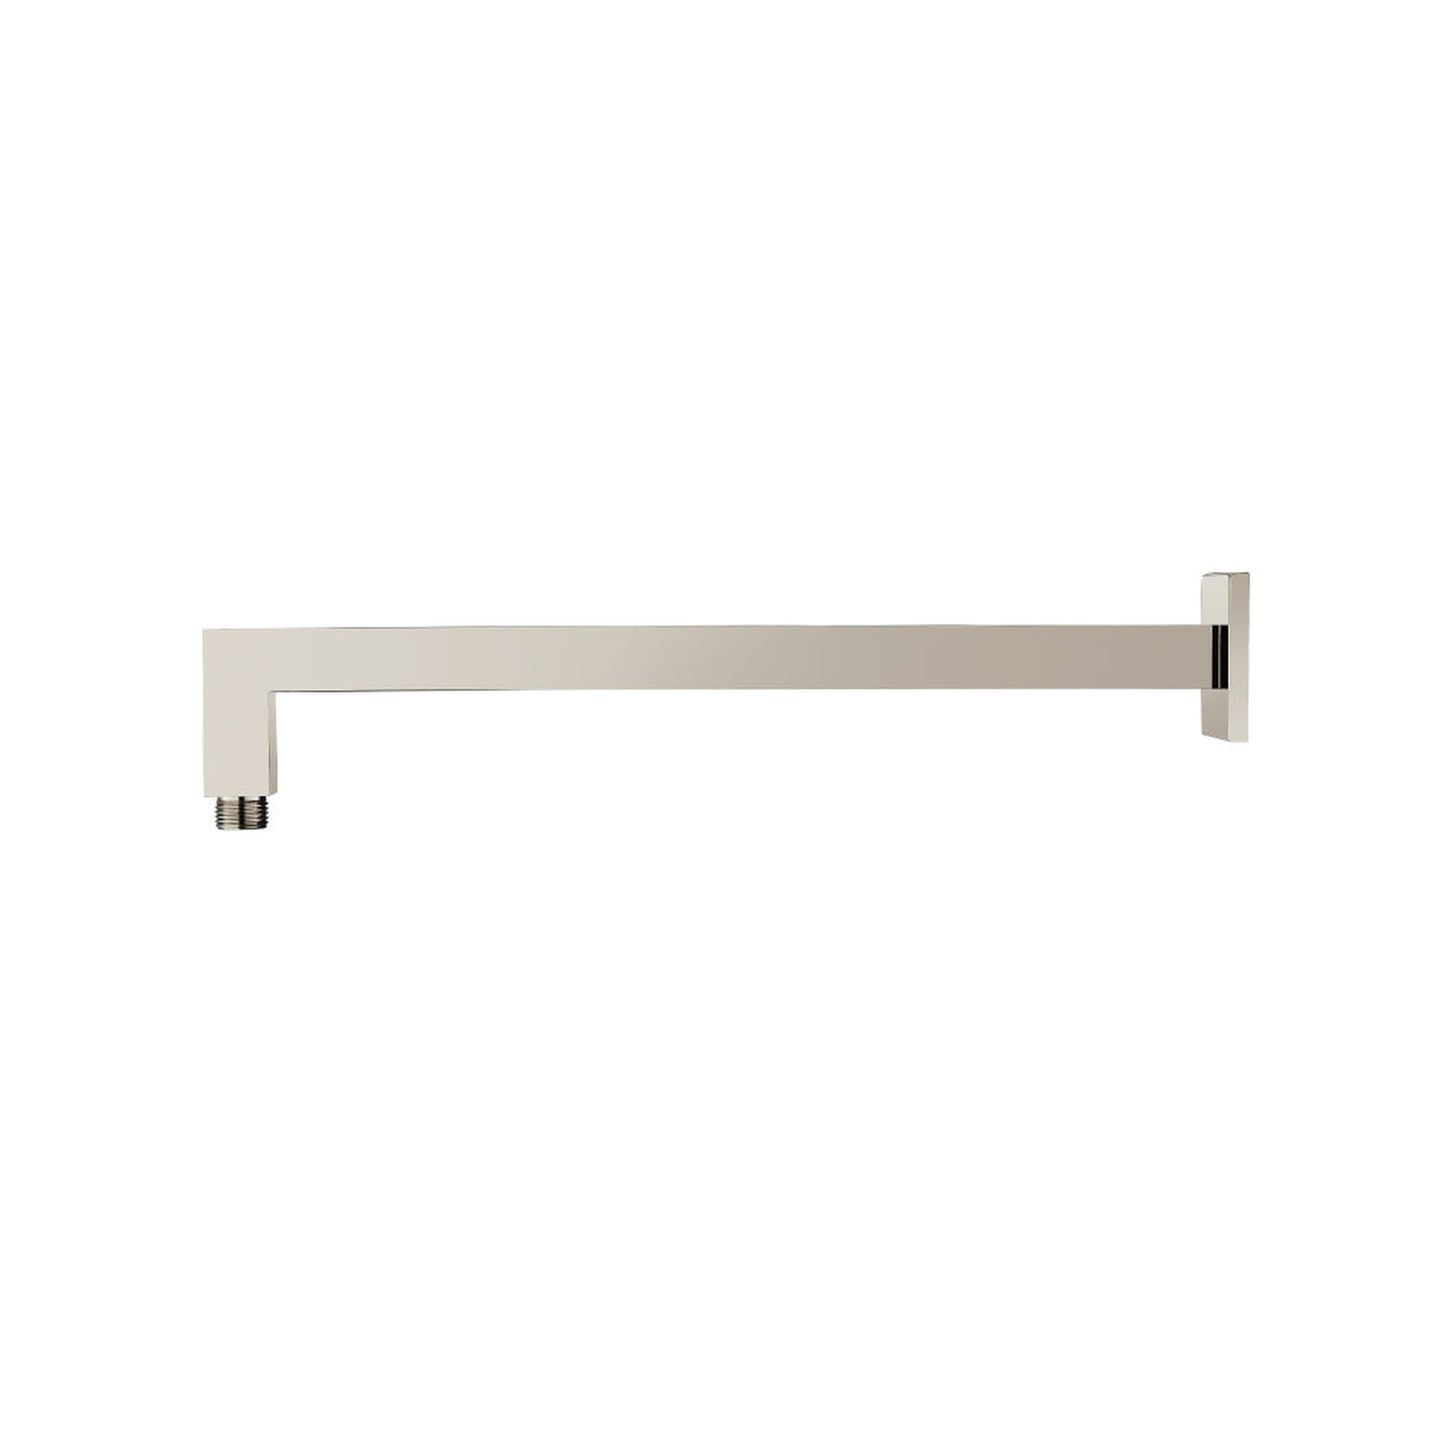 Isenberg Universal Fixtures 16" Polished Nickel PVD Solid Brass Wall-Mounted Shower Arm With Angled Extension and Square Sliding Flange